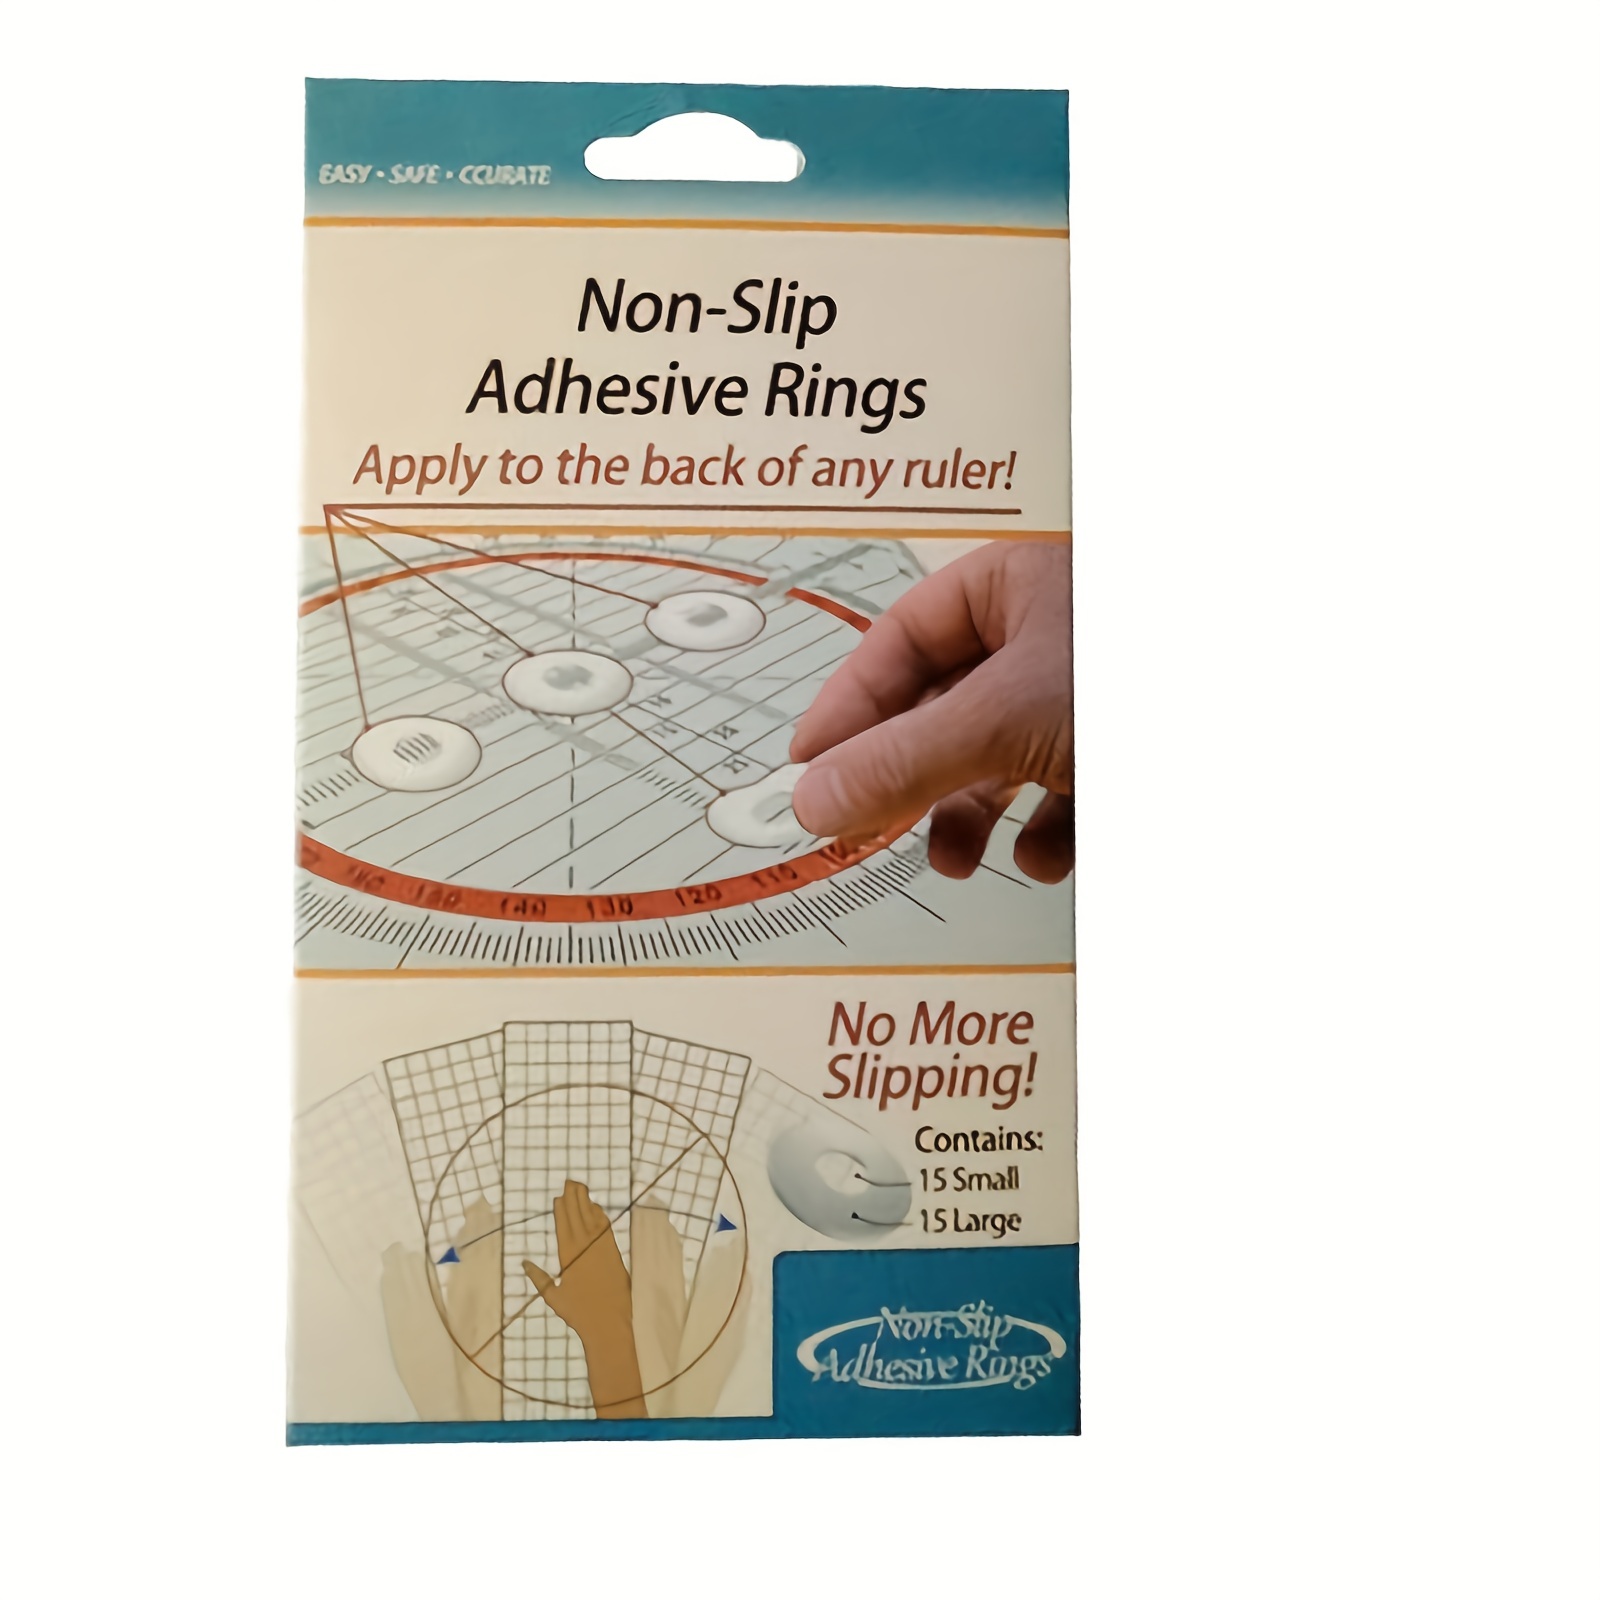  Non Grips Slip Slide Grips Sewing Rulers Adhesive